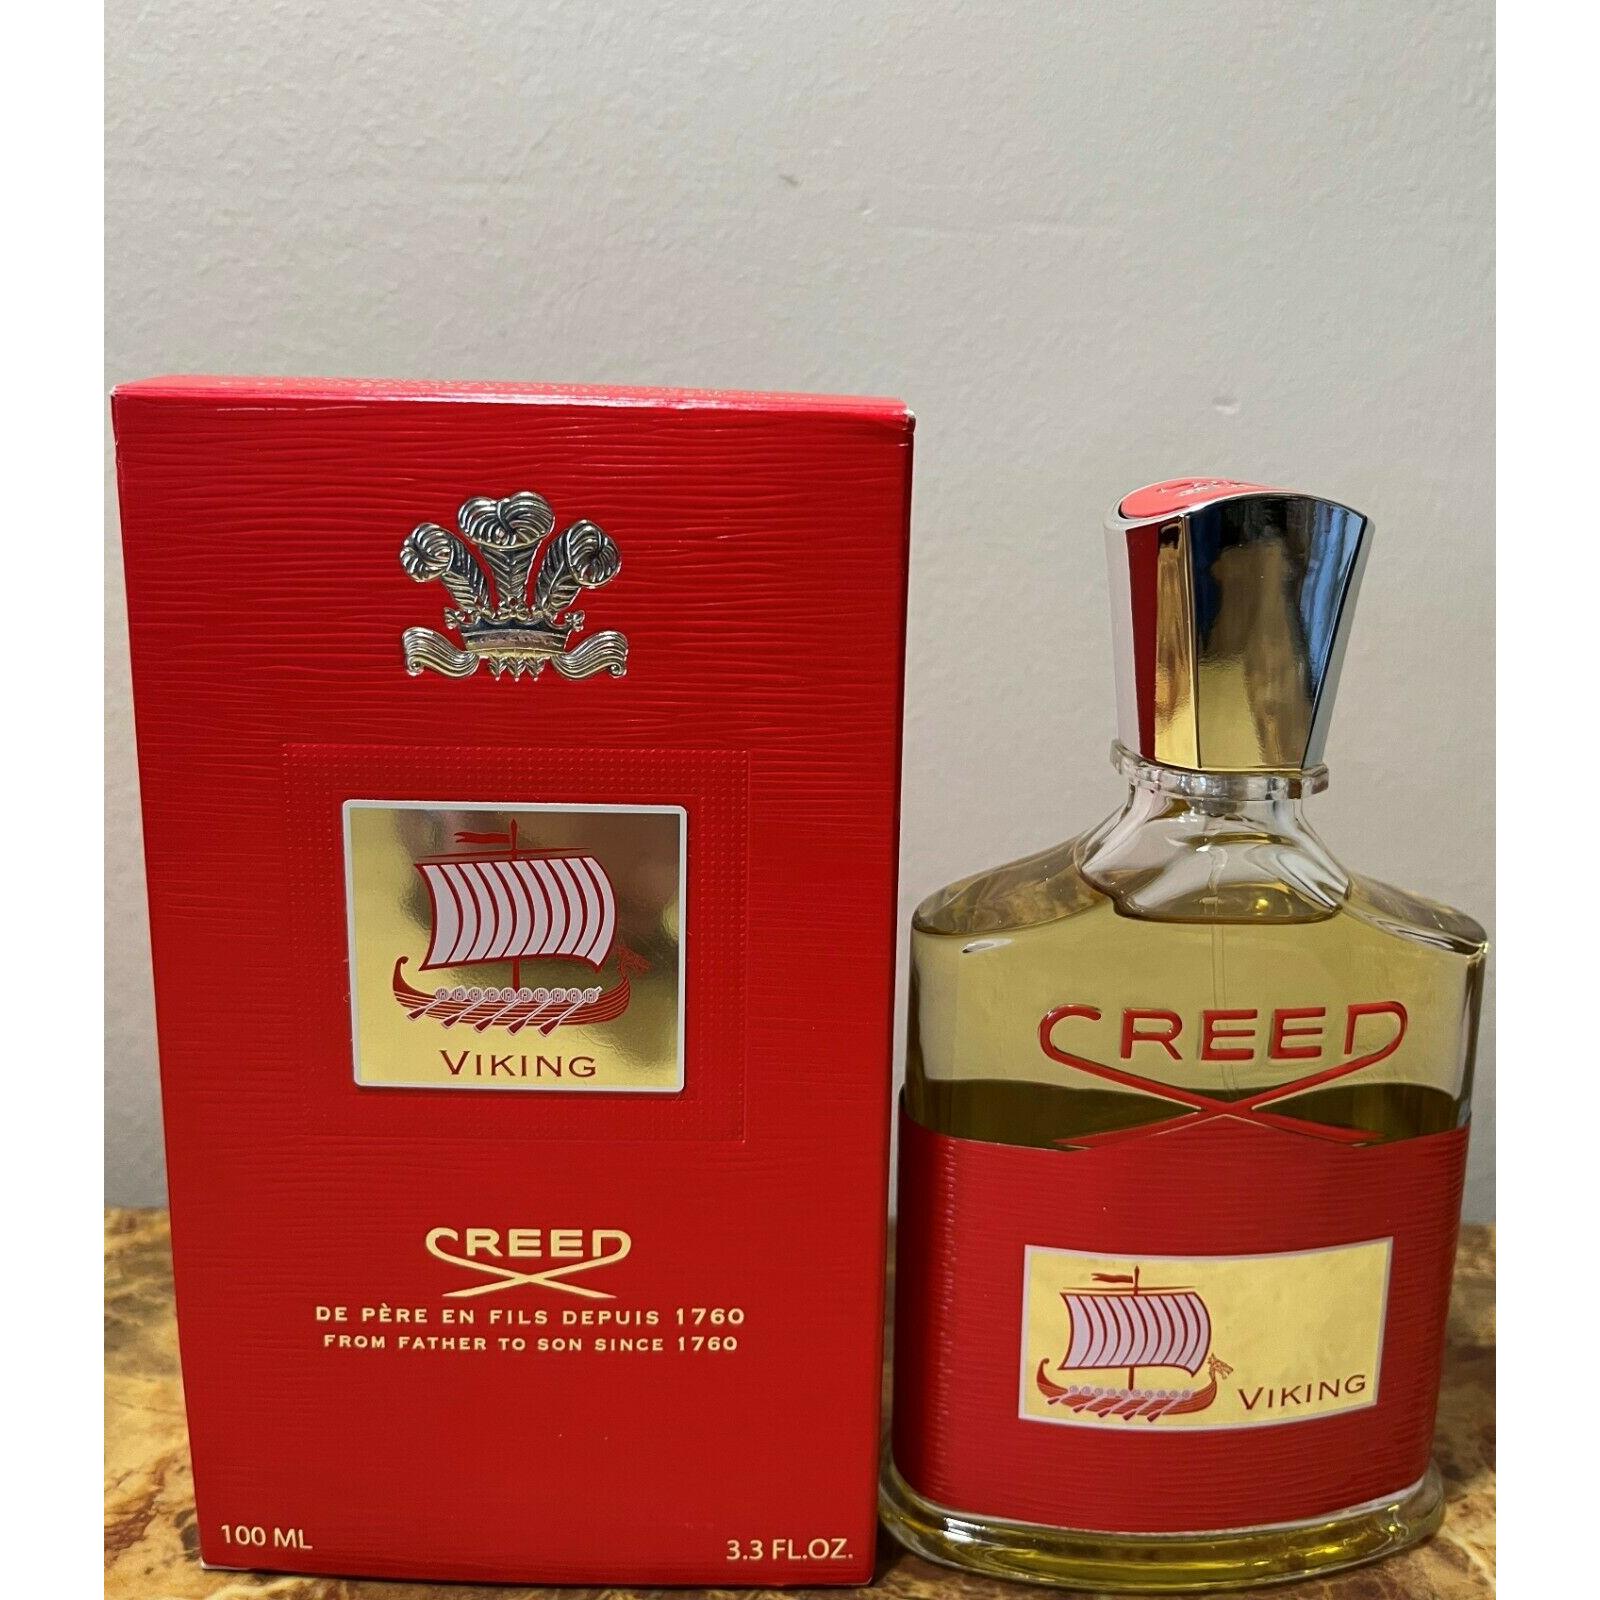 Creed Brand - Shop Creed best selling | Fash Direct - Page 3